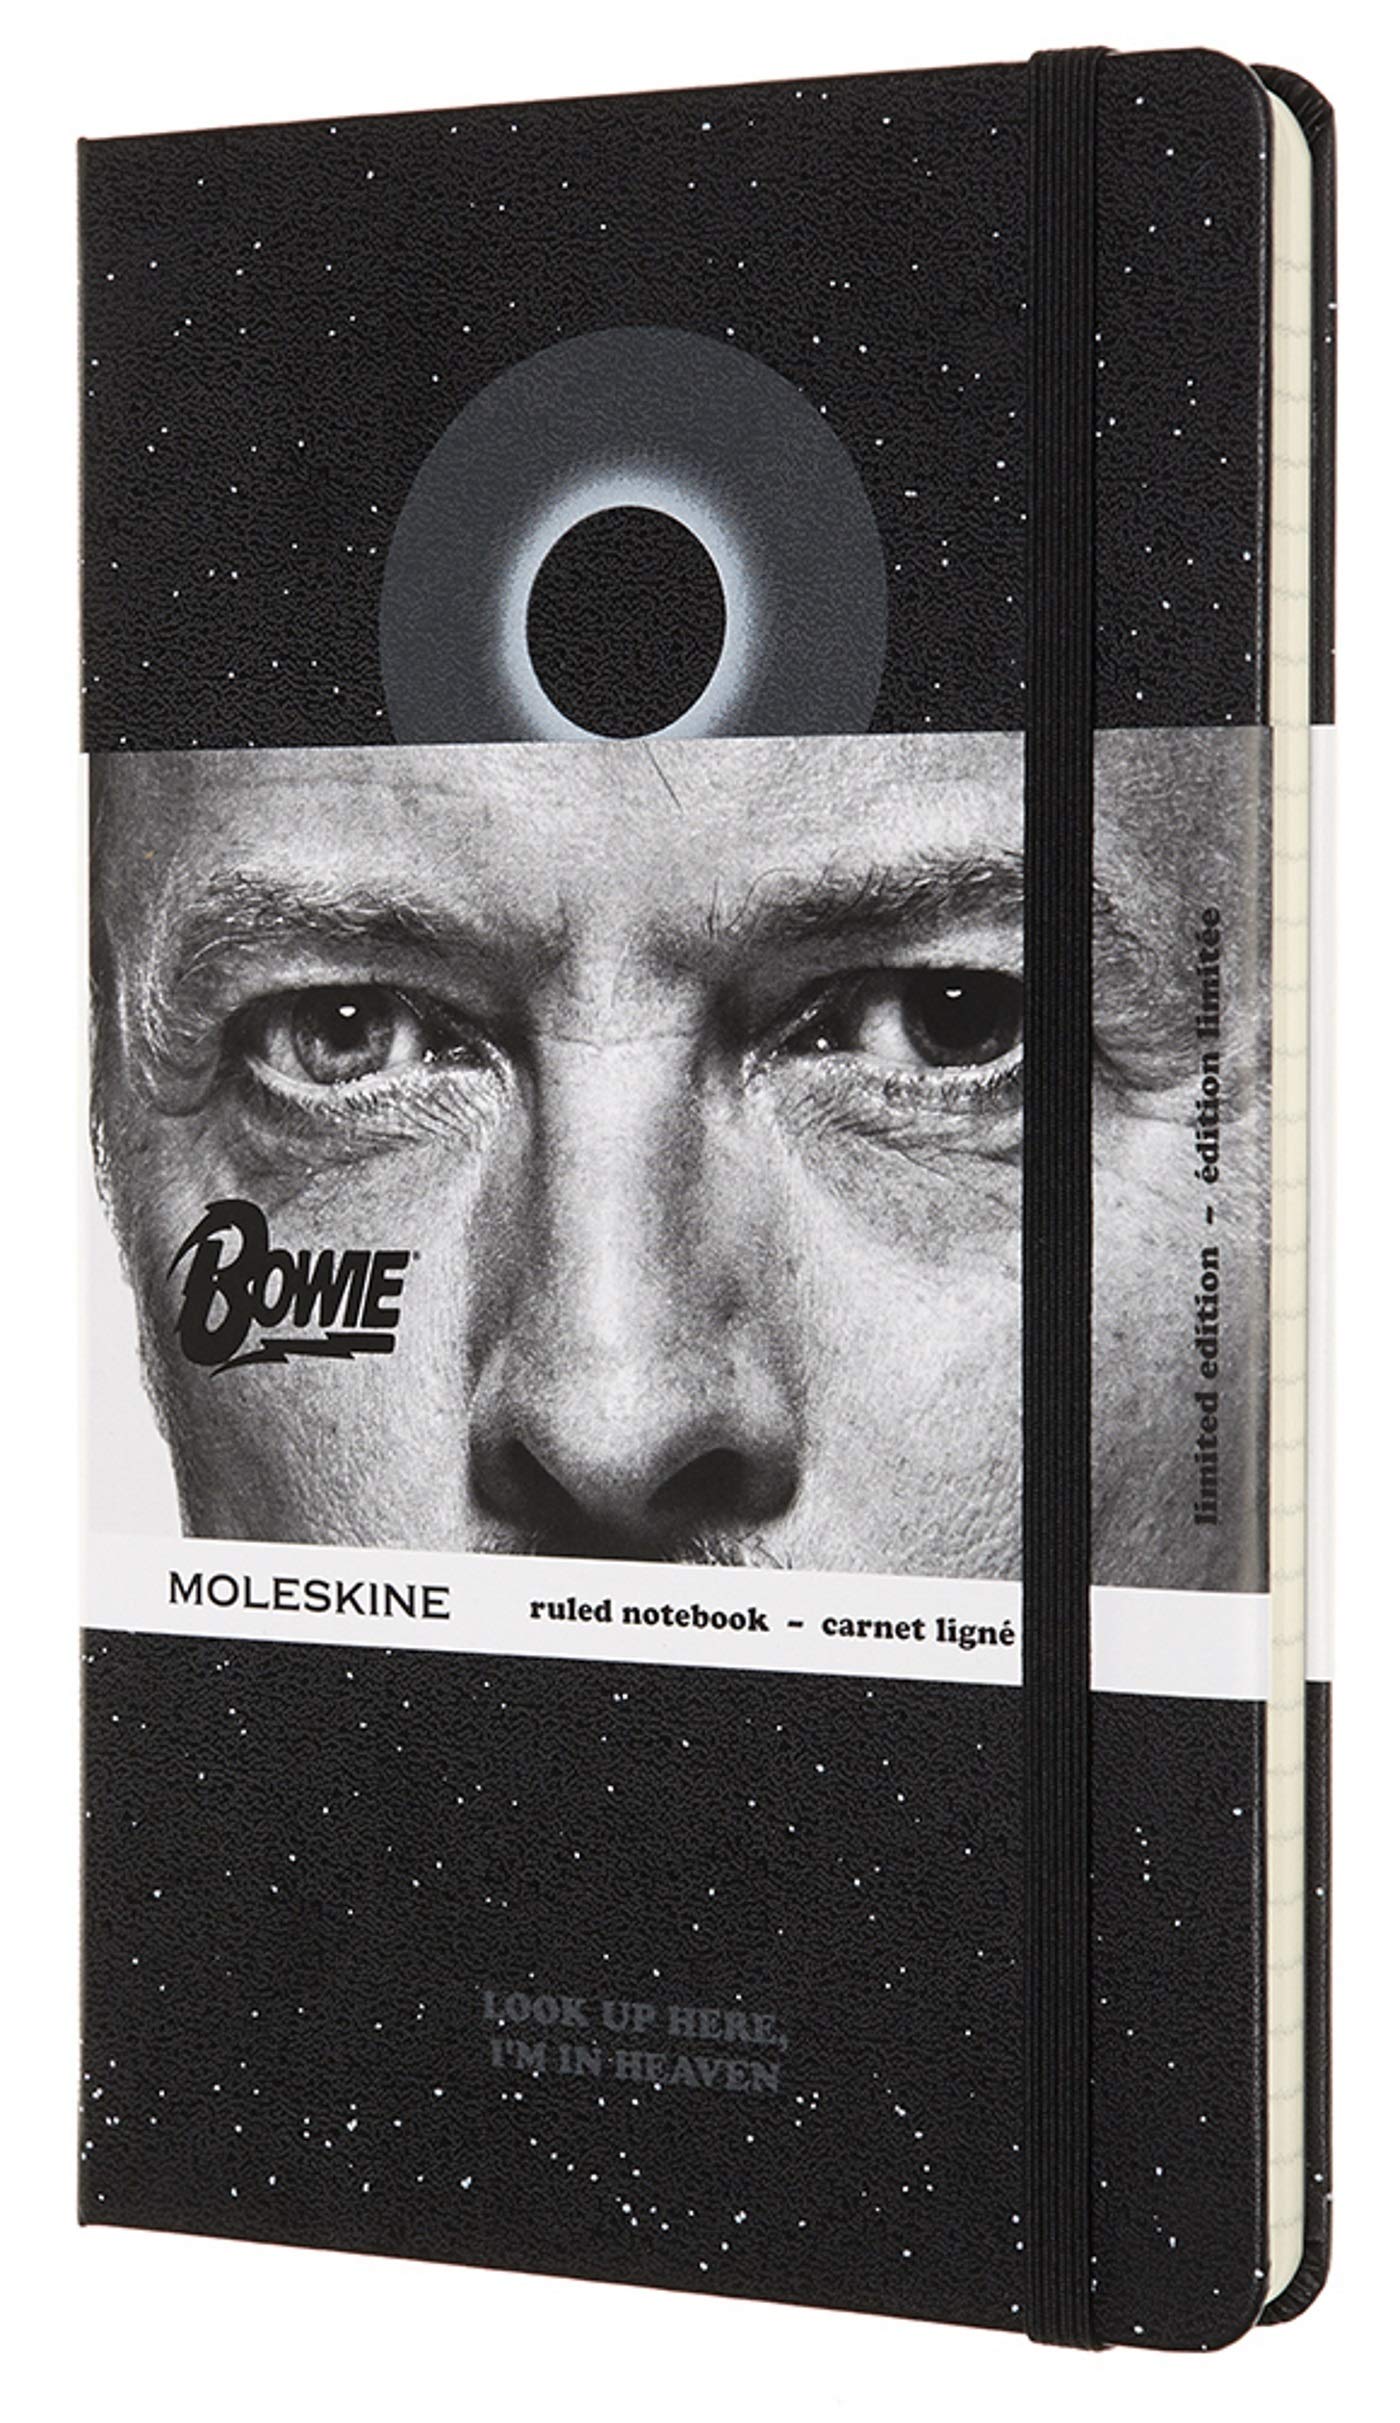 Carnet - Moleskine David Bowie Limited Edition Ruled Notebook - Large, Hard Cover, Black - Look Up Here, I`m In Heaven | Moleskine